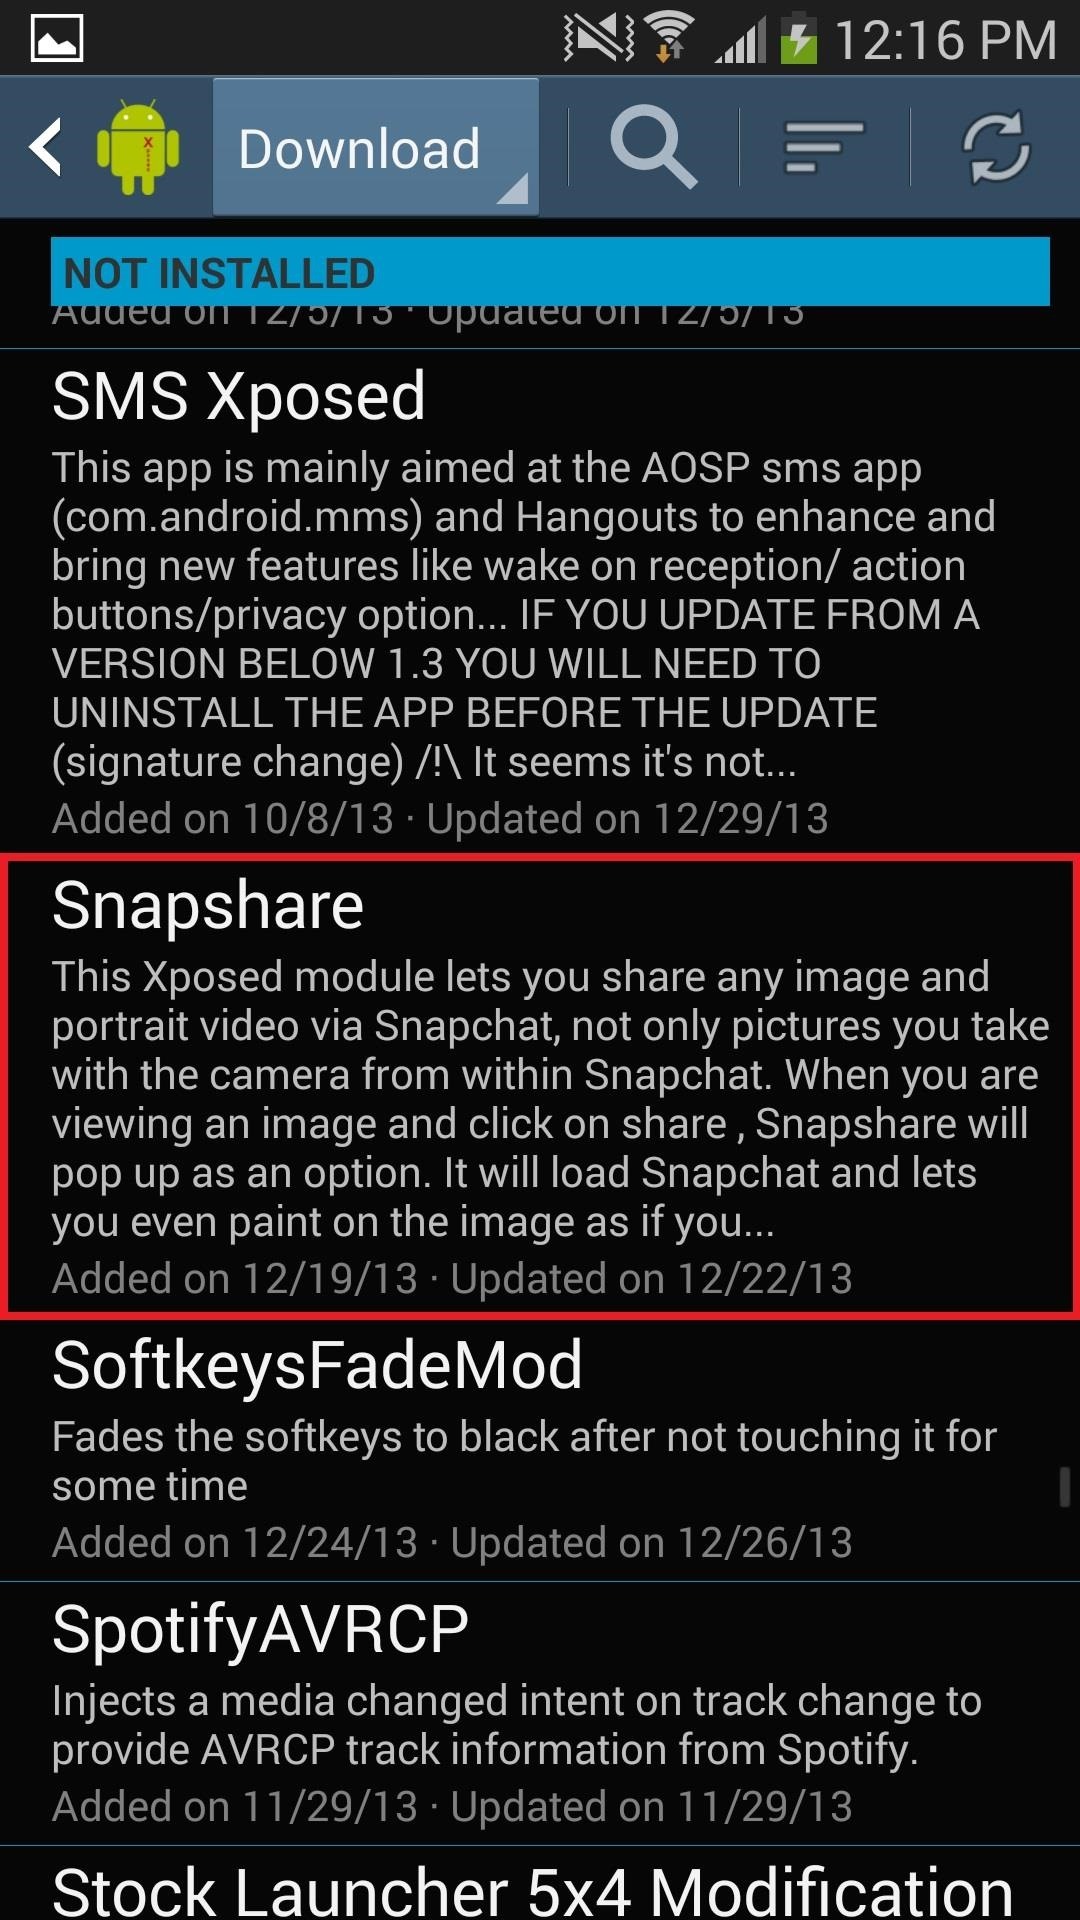 How to Use Any Photo or Video in Your Gallery as a Snapchat on Your Samsung Galaxy Note 3